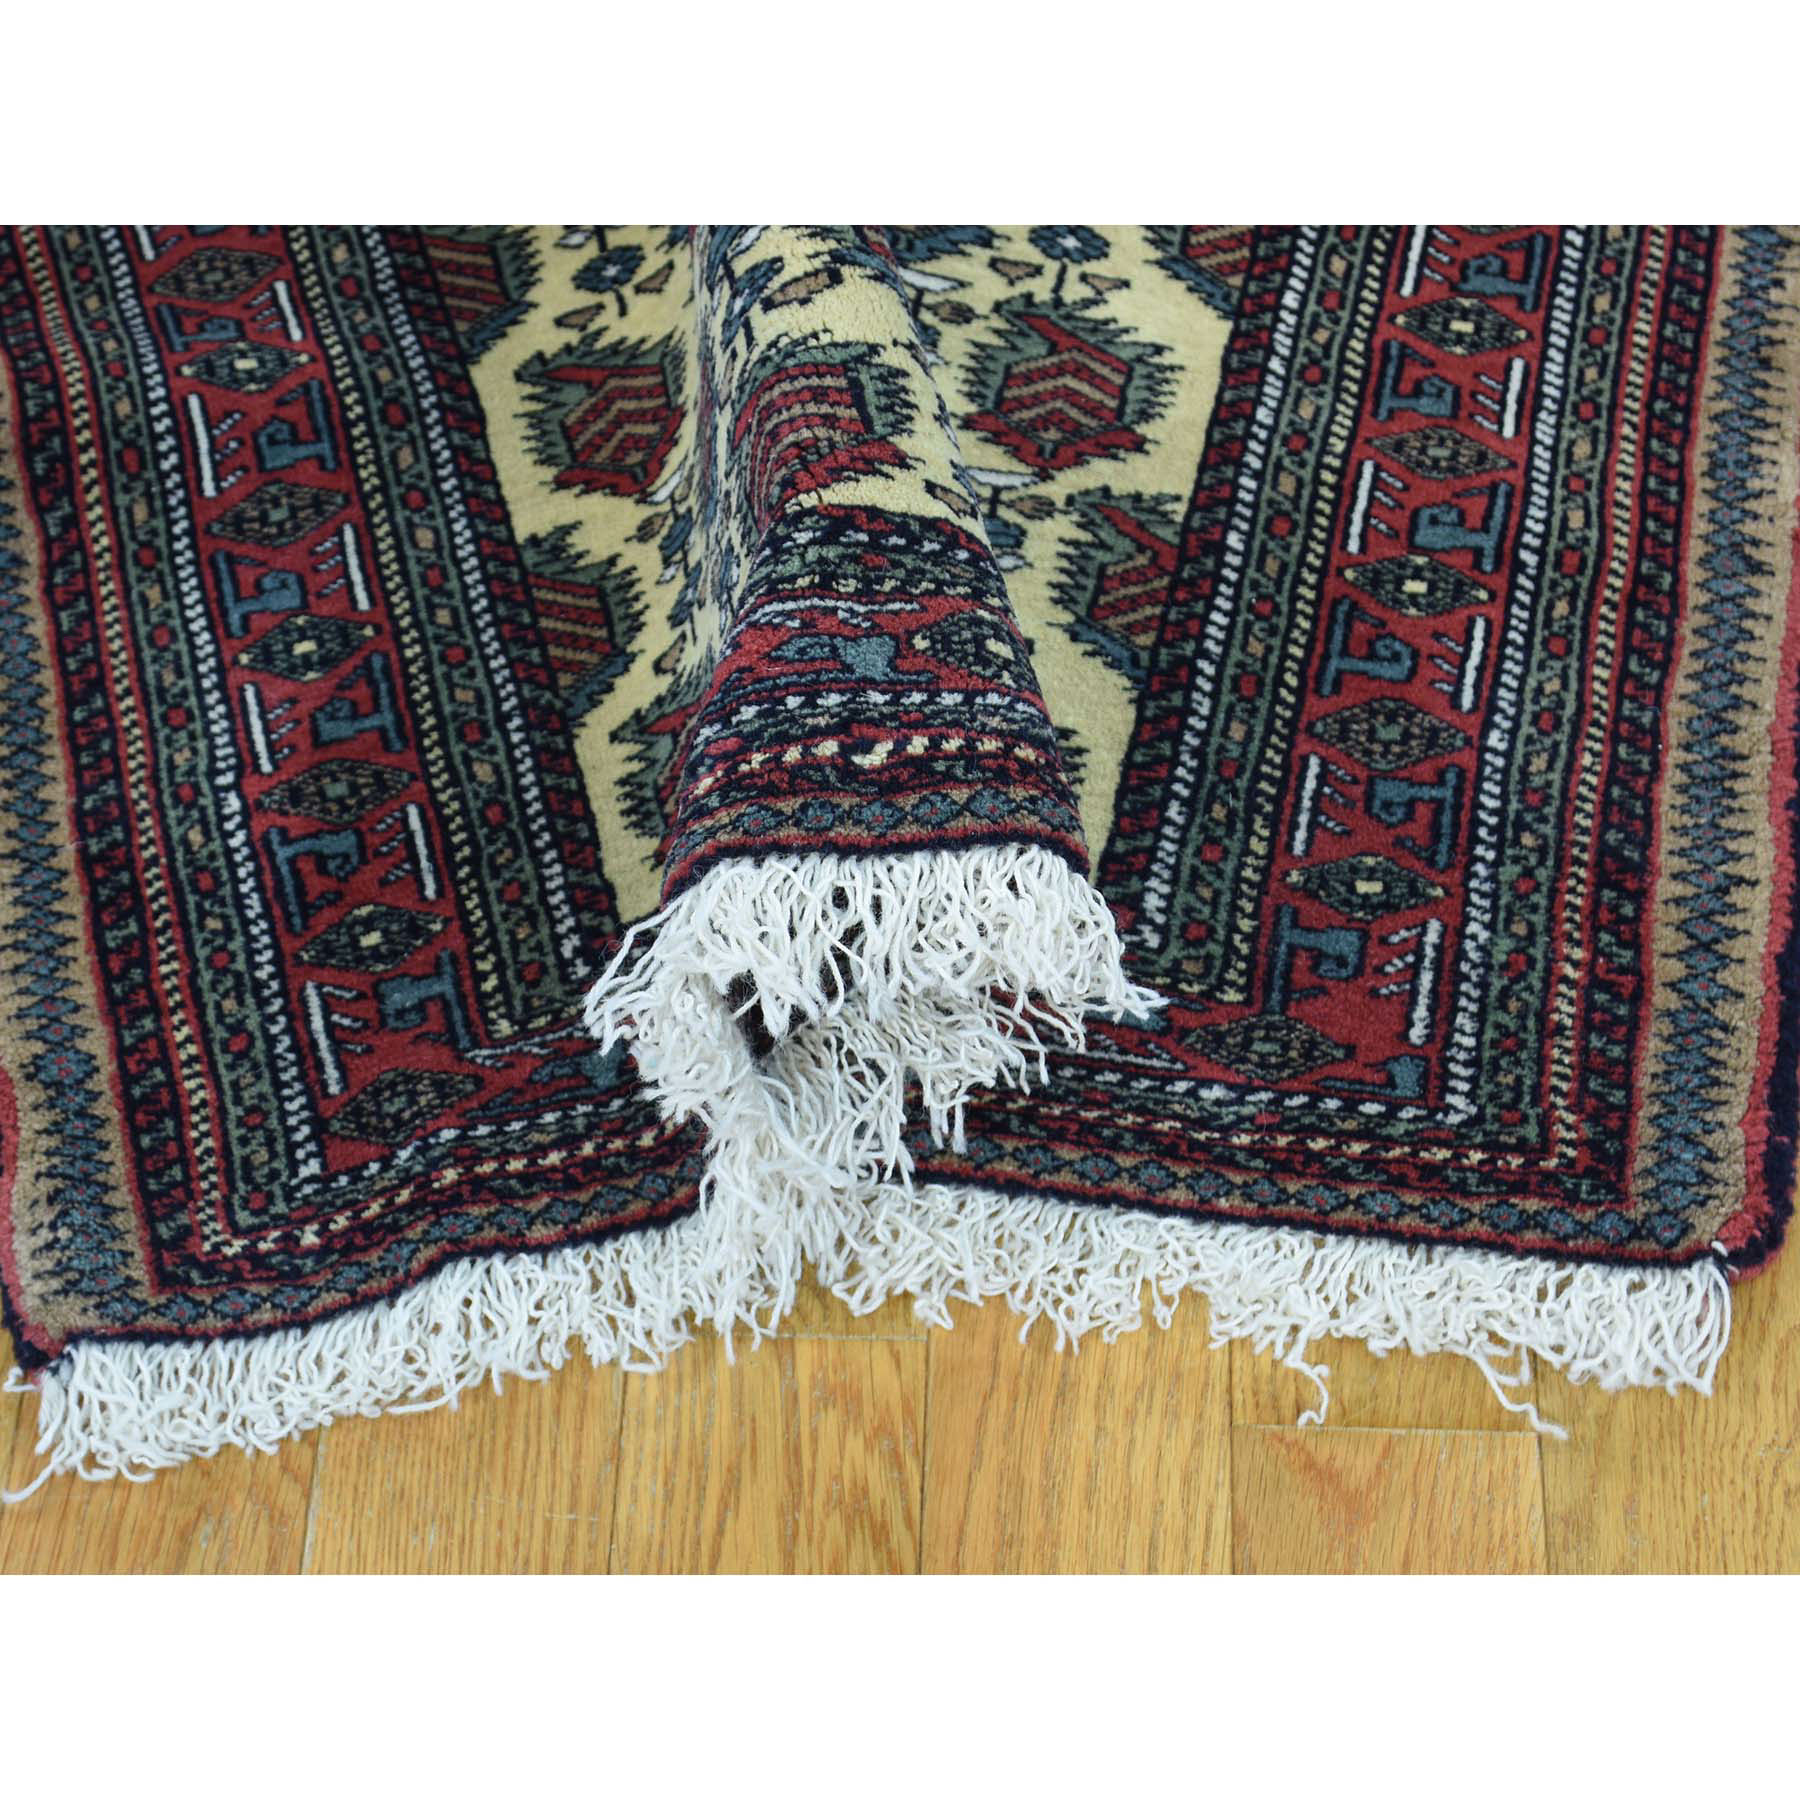 2-10 x13- Northwest Persian Hand-Knotted Tribal Oriental Runner Rug 